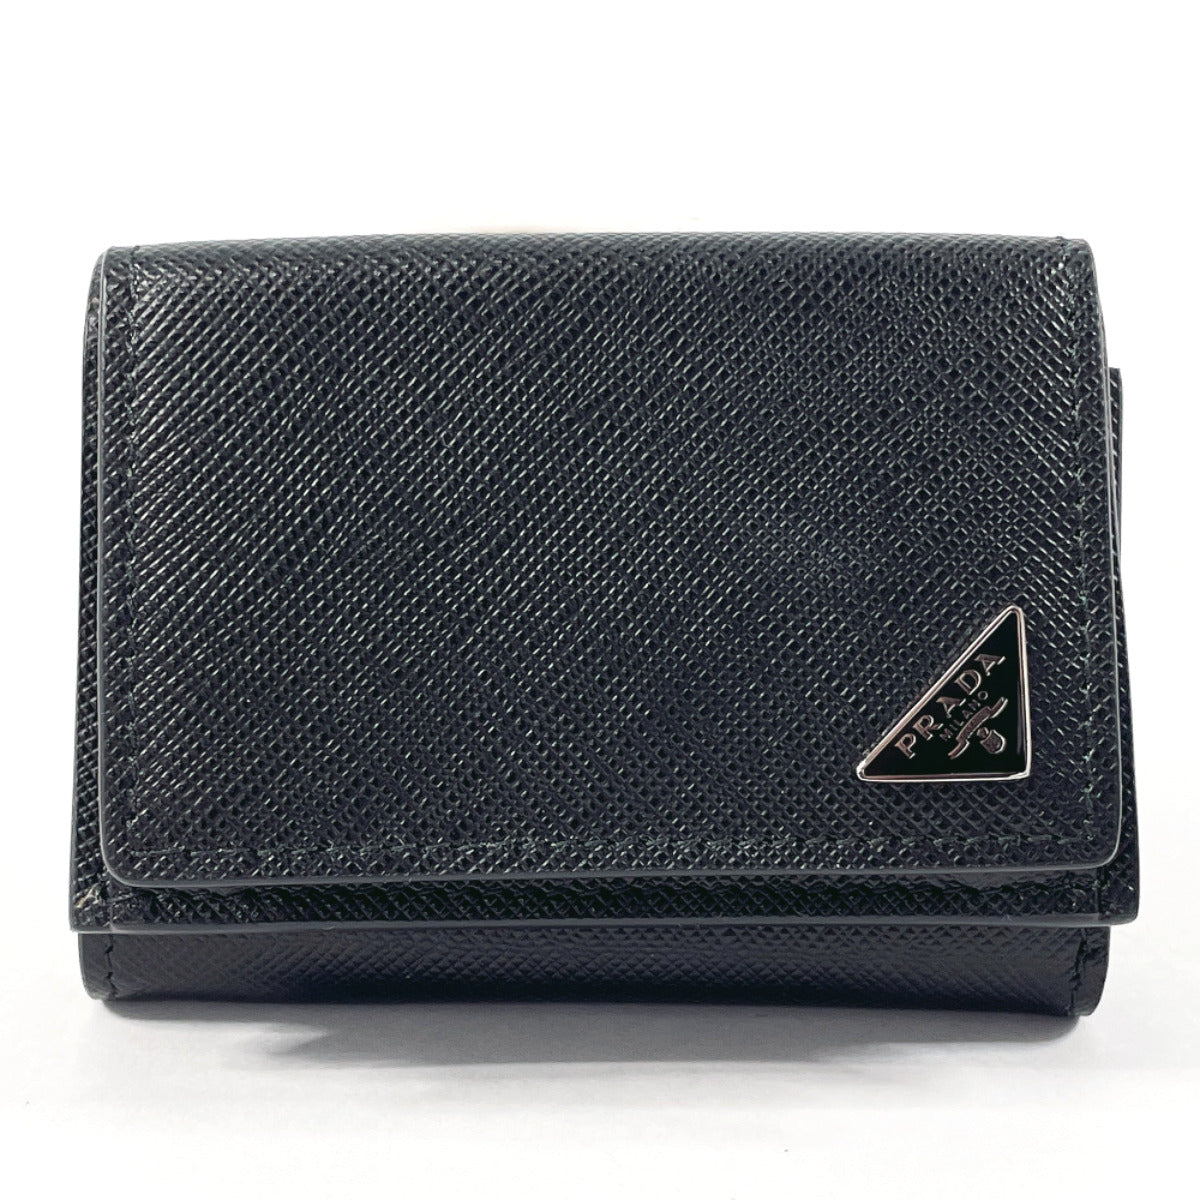 Prada Saffiano Trifold Wallet Short Wallet Leather 2MH021 in